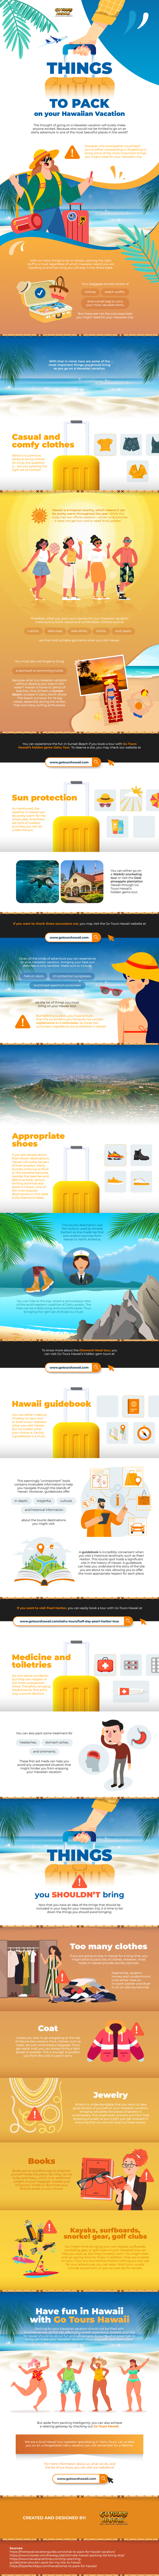 Things-to-Pack-on-your-Hawaiian-Vacation-01-infographic-image-0544